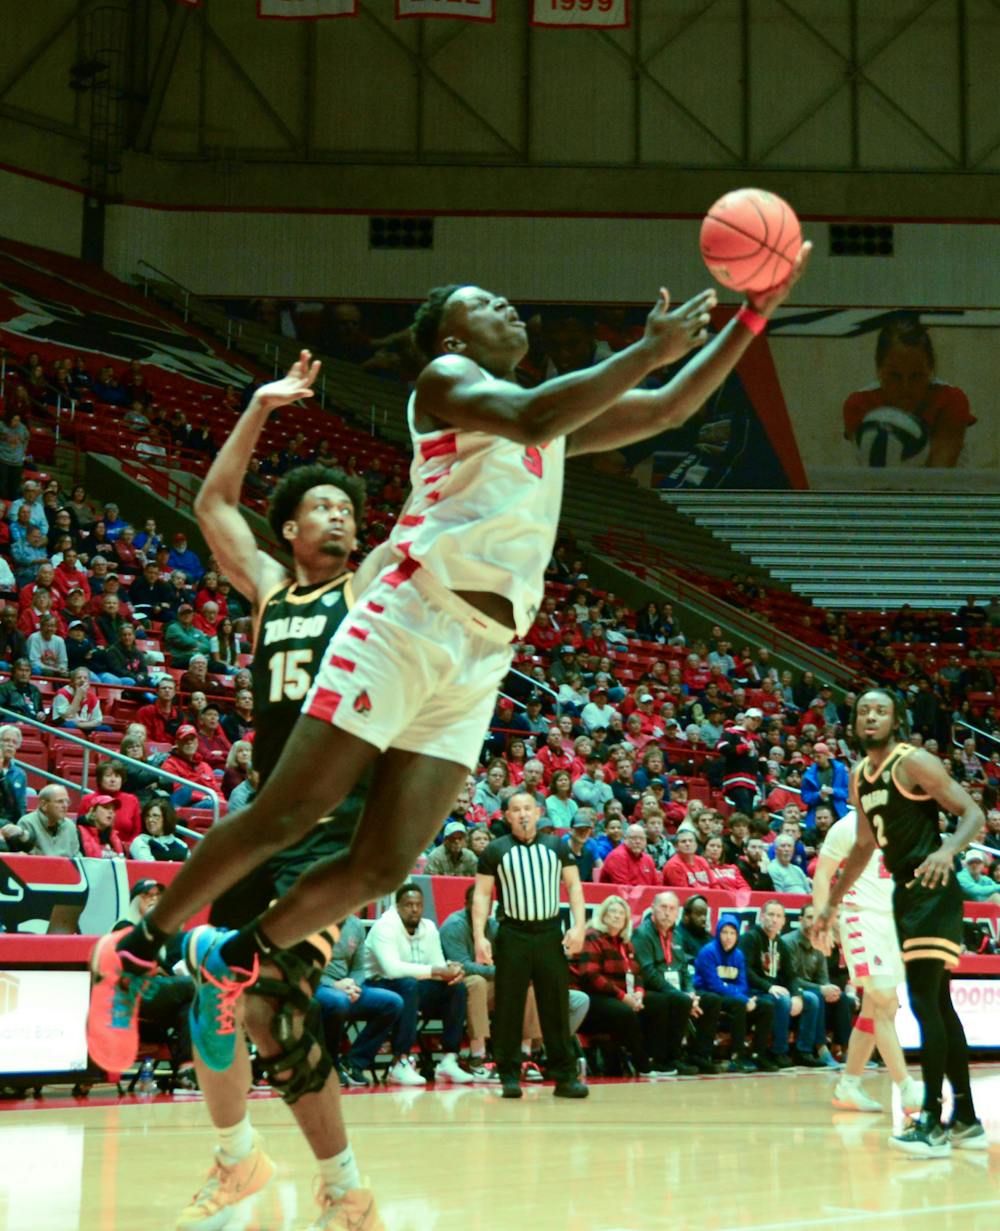 <p>Sophomore center Payton Sparks goes for a basket in a game against Toledo on March 3 at Worthen Arena. Brandon Dean, DN</p>